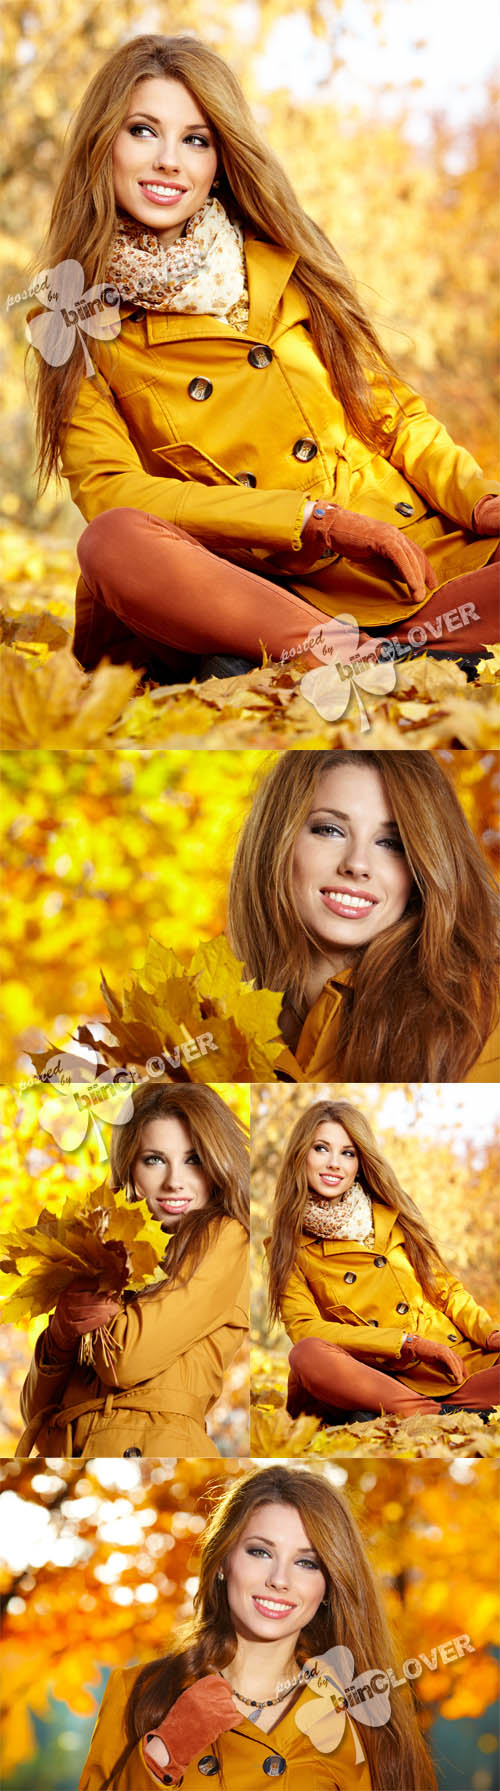 Woman and autumn leaves 0232